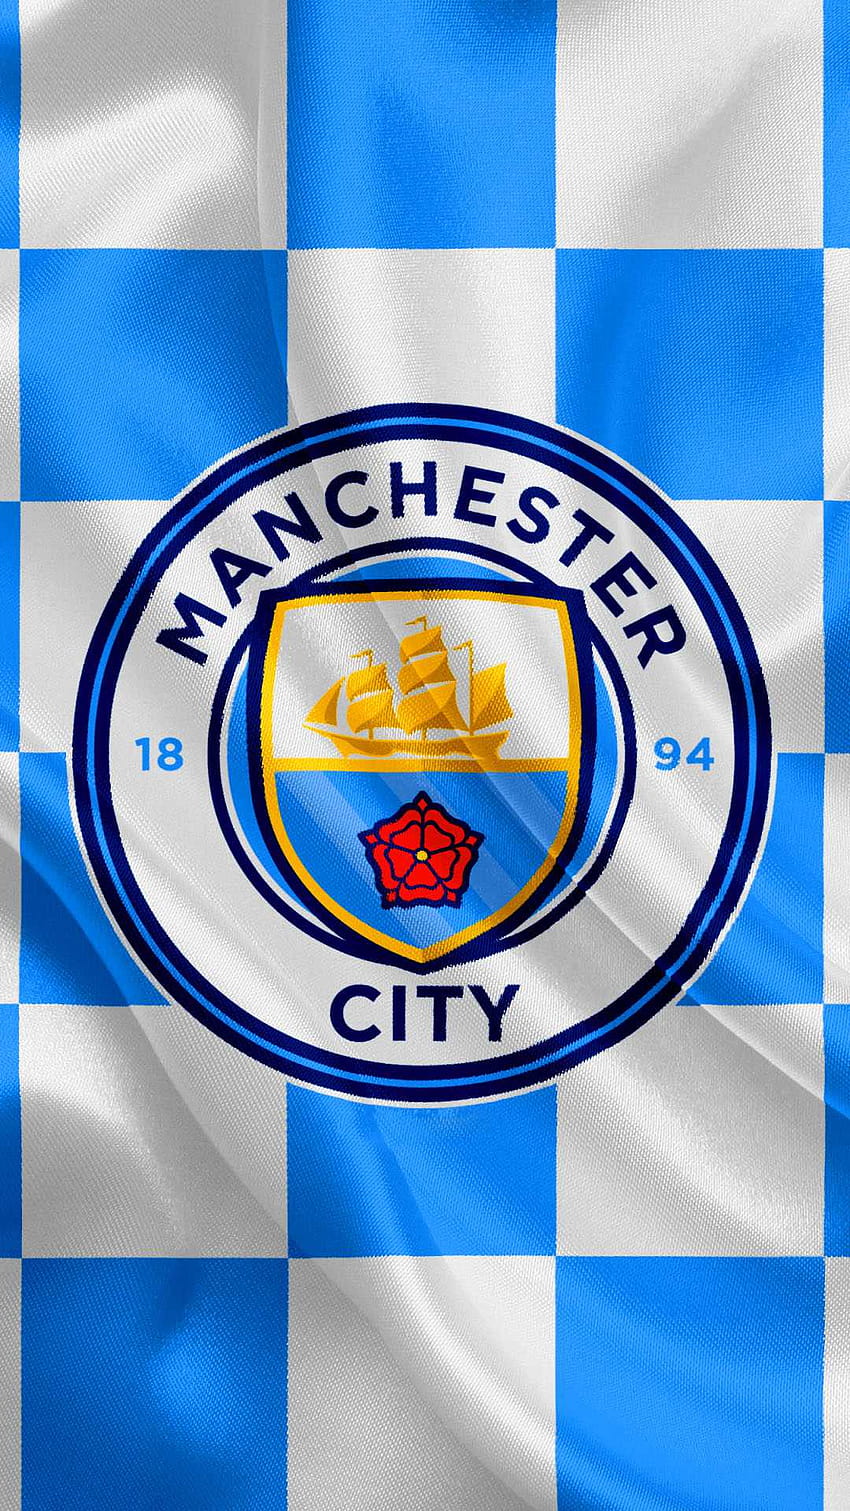 Download Manchester City Cool Logo Iphone Wallpaper | Wallpapers.com